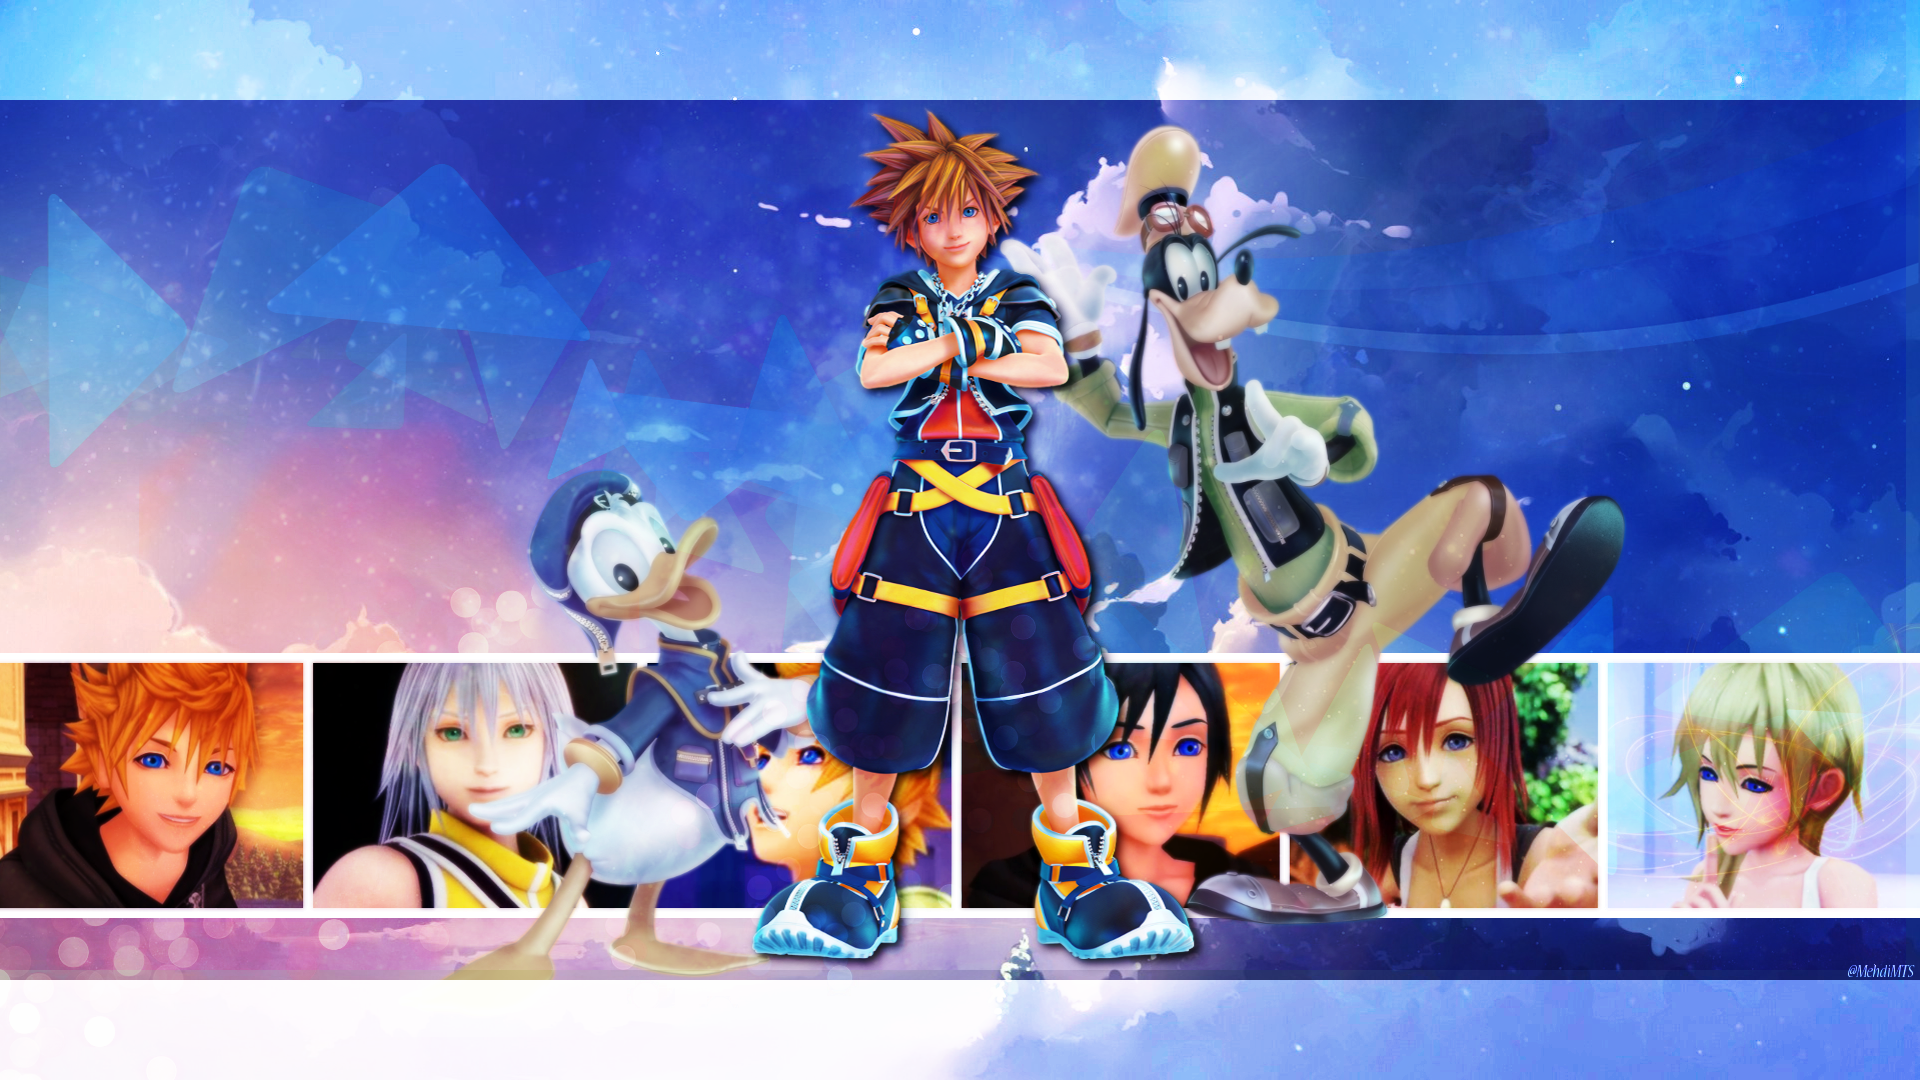 Kingdom Hearts 3 Cover Art Wallpapers